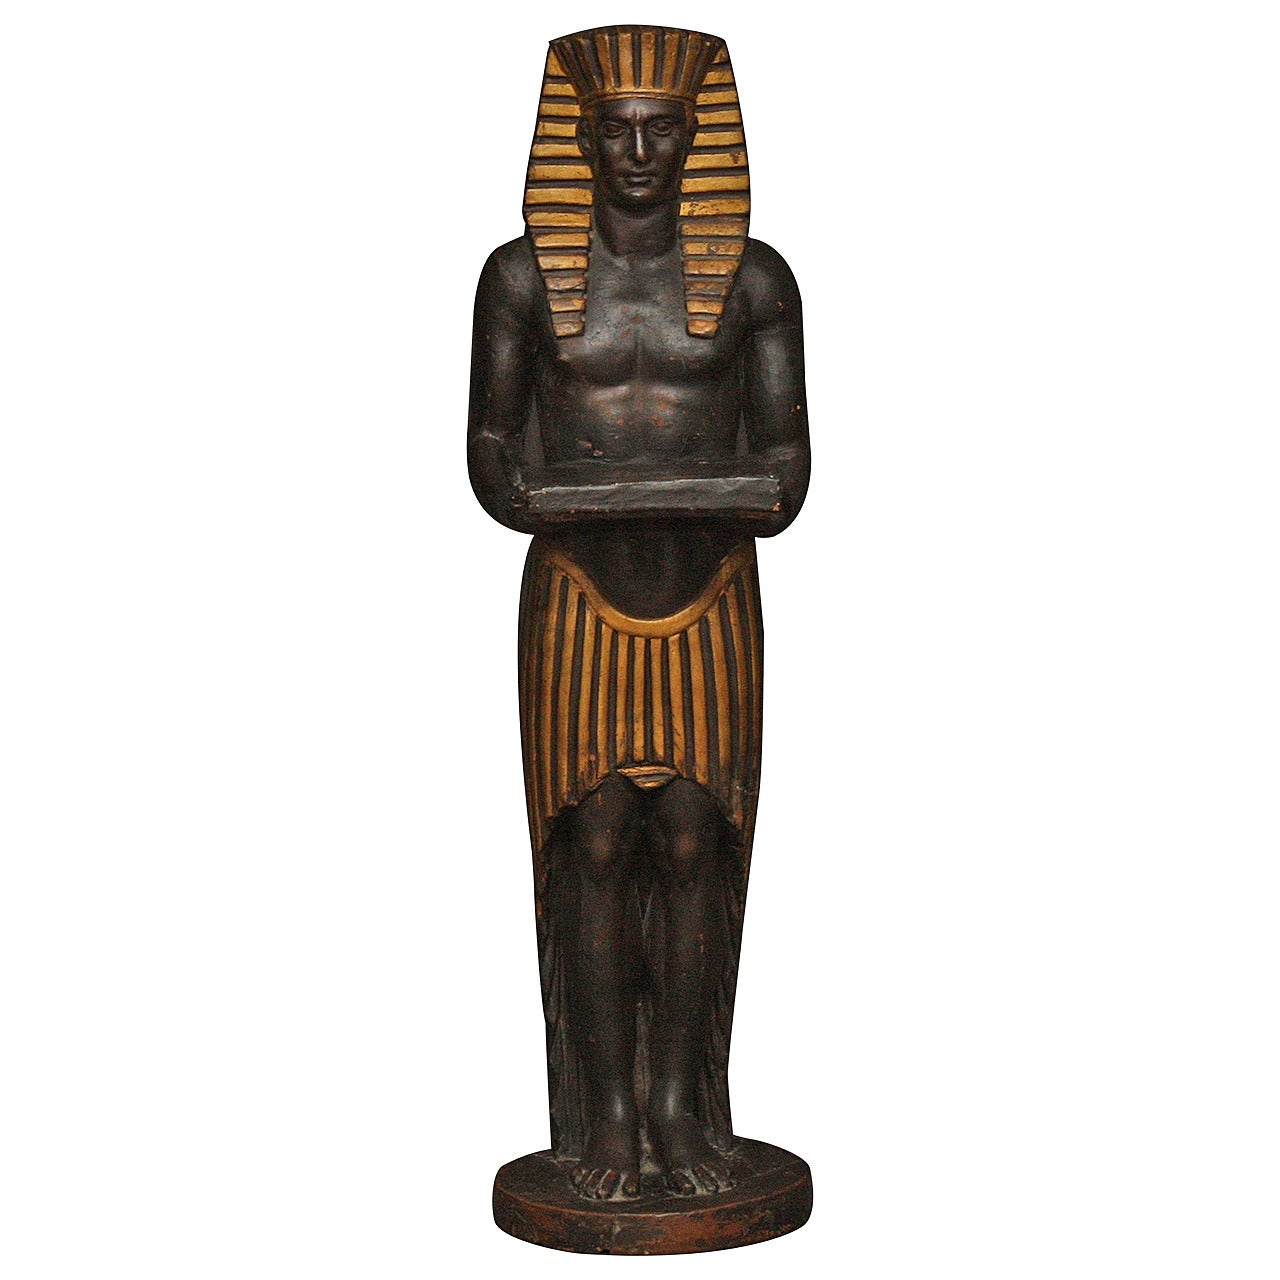 Egyptian revival drinks table. Vintage painted terracotta martini table in the Egyptian Revival style. Continental deco period kouros figure a la Antinous drinks stand / candle stand / vide poche, England, early 20th century.
Dimensions: 10.5